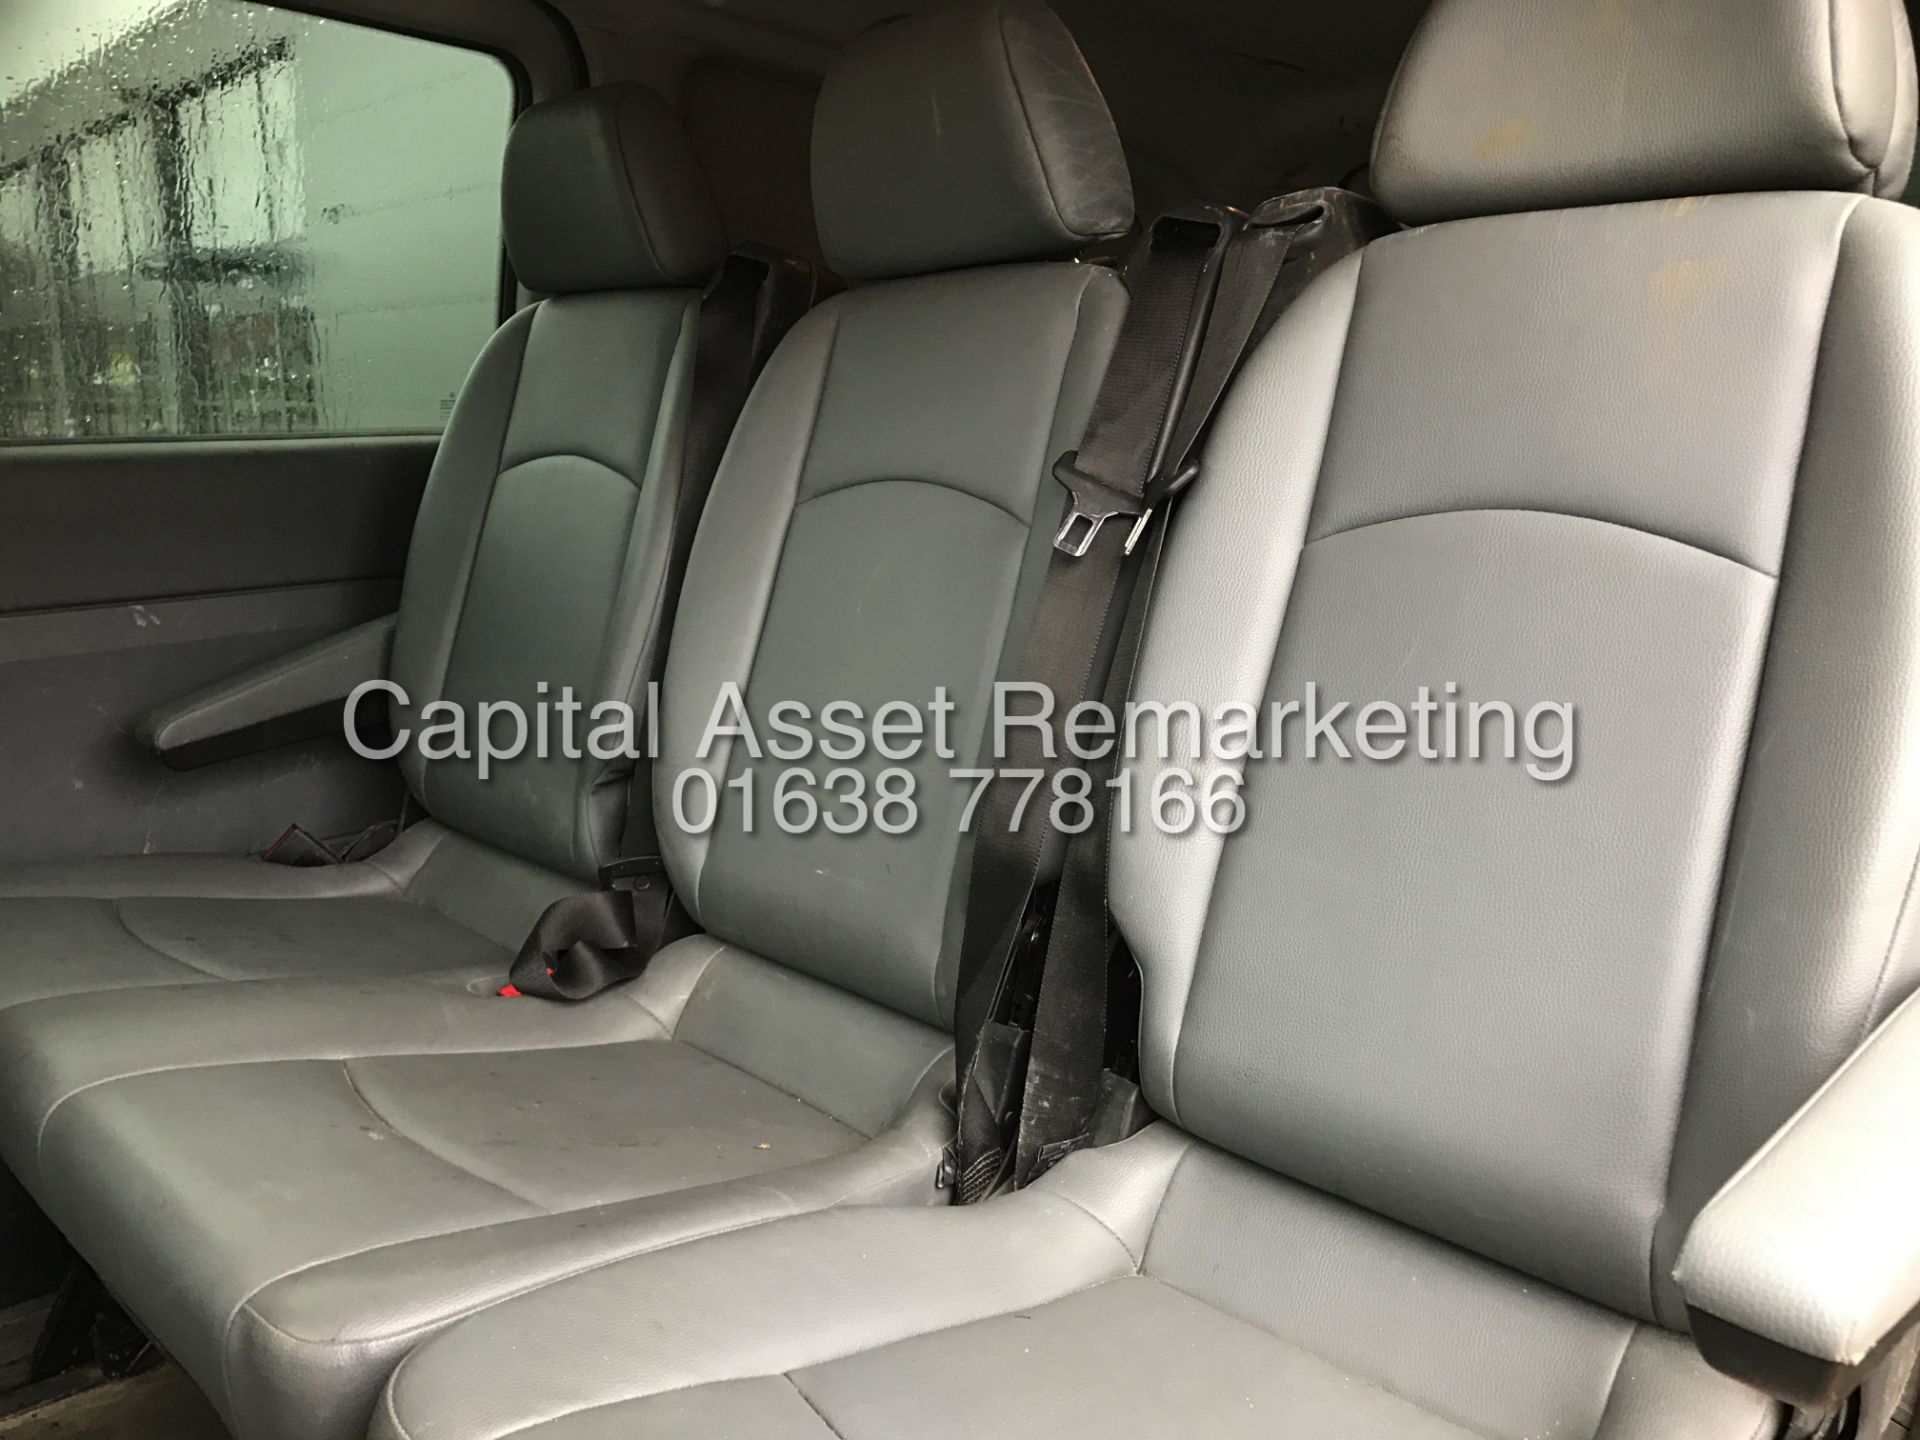 (ON SALE) MERCEDES VITO "SPORTY - 115BHP" LWB (2011 MODEL) 5 SEATER DUELINER -1 OWNER-AIR CON-ALLOYS - Image 18 of 18